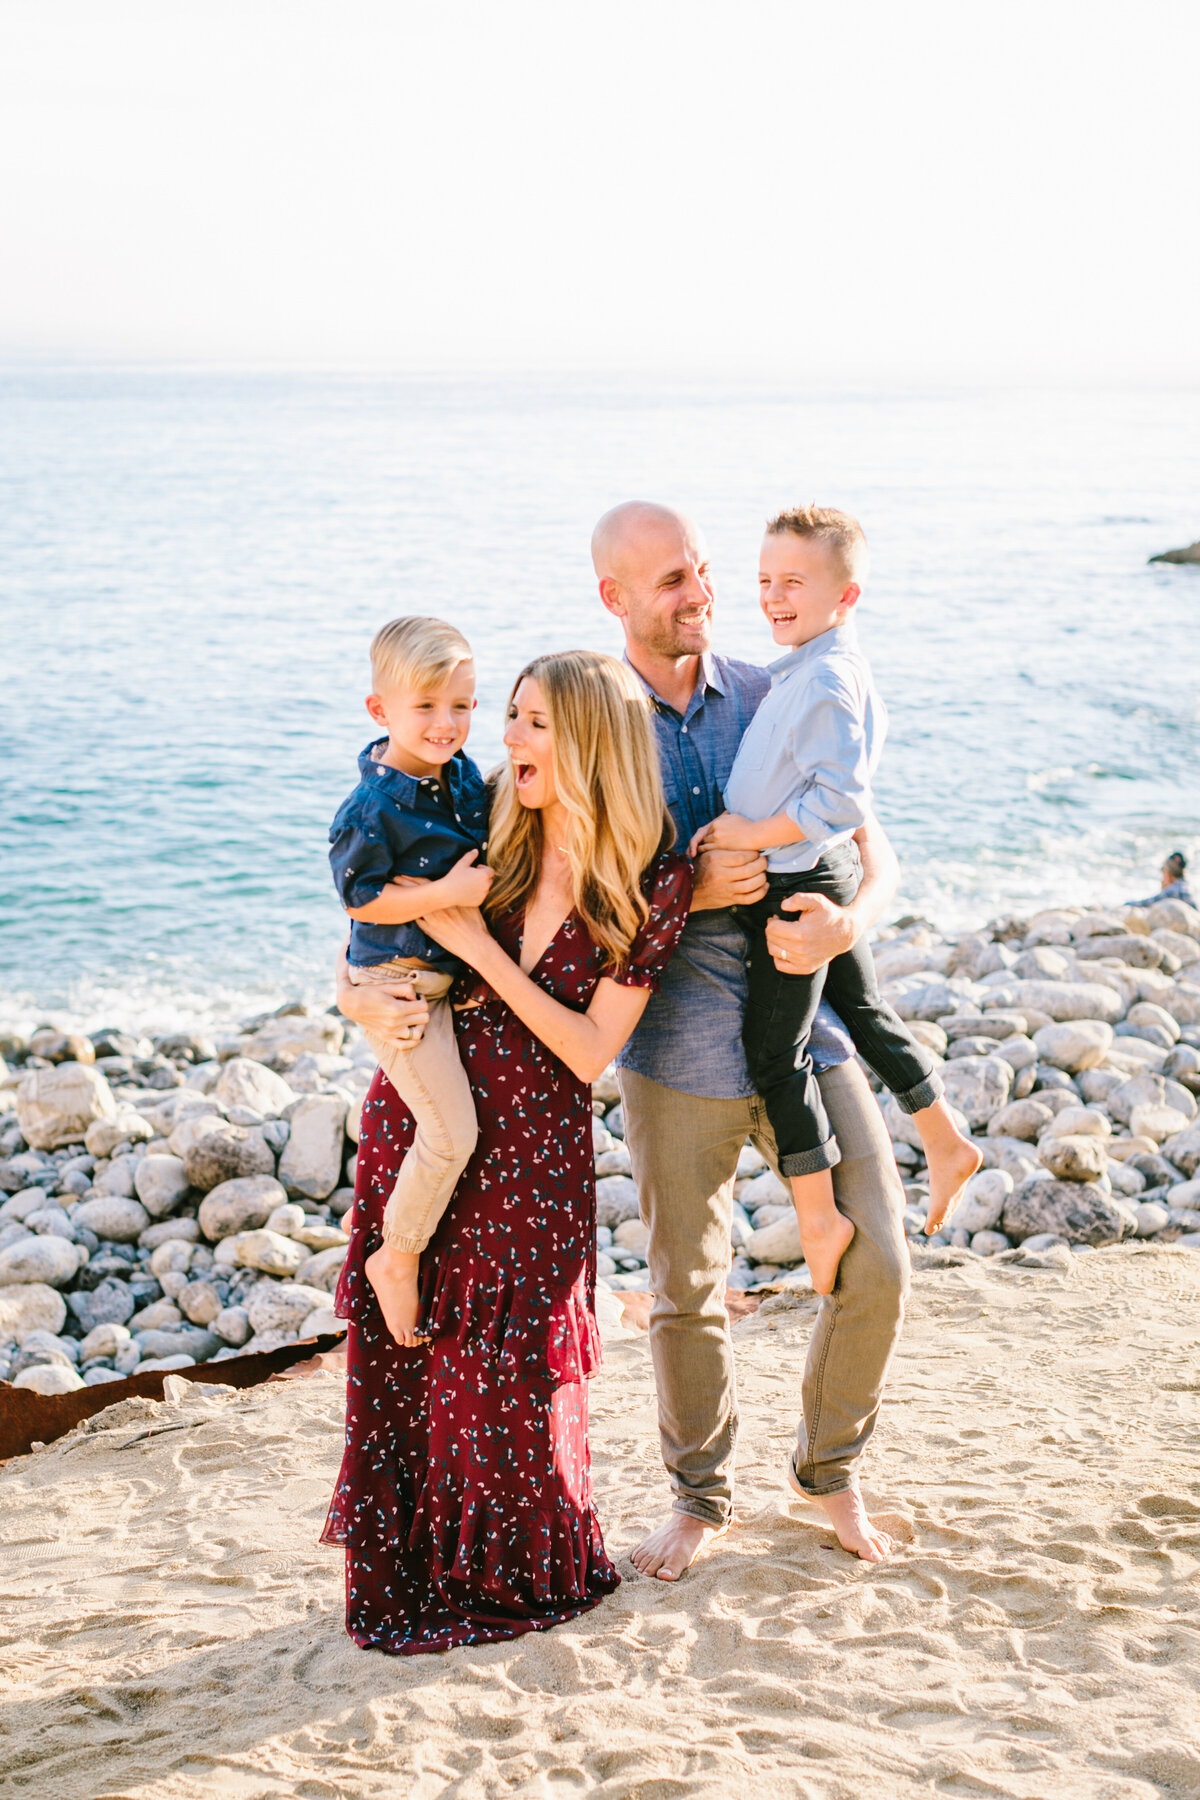 Best California and Texas Family Photographer-Jodee Debes Photography-20